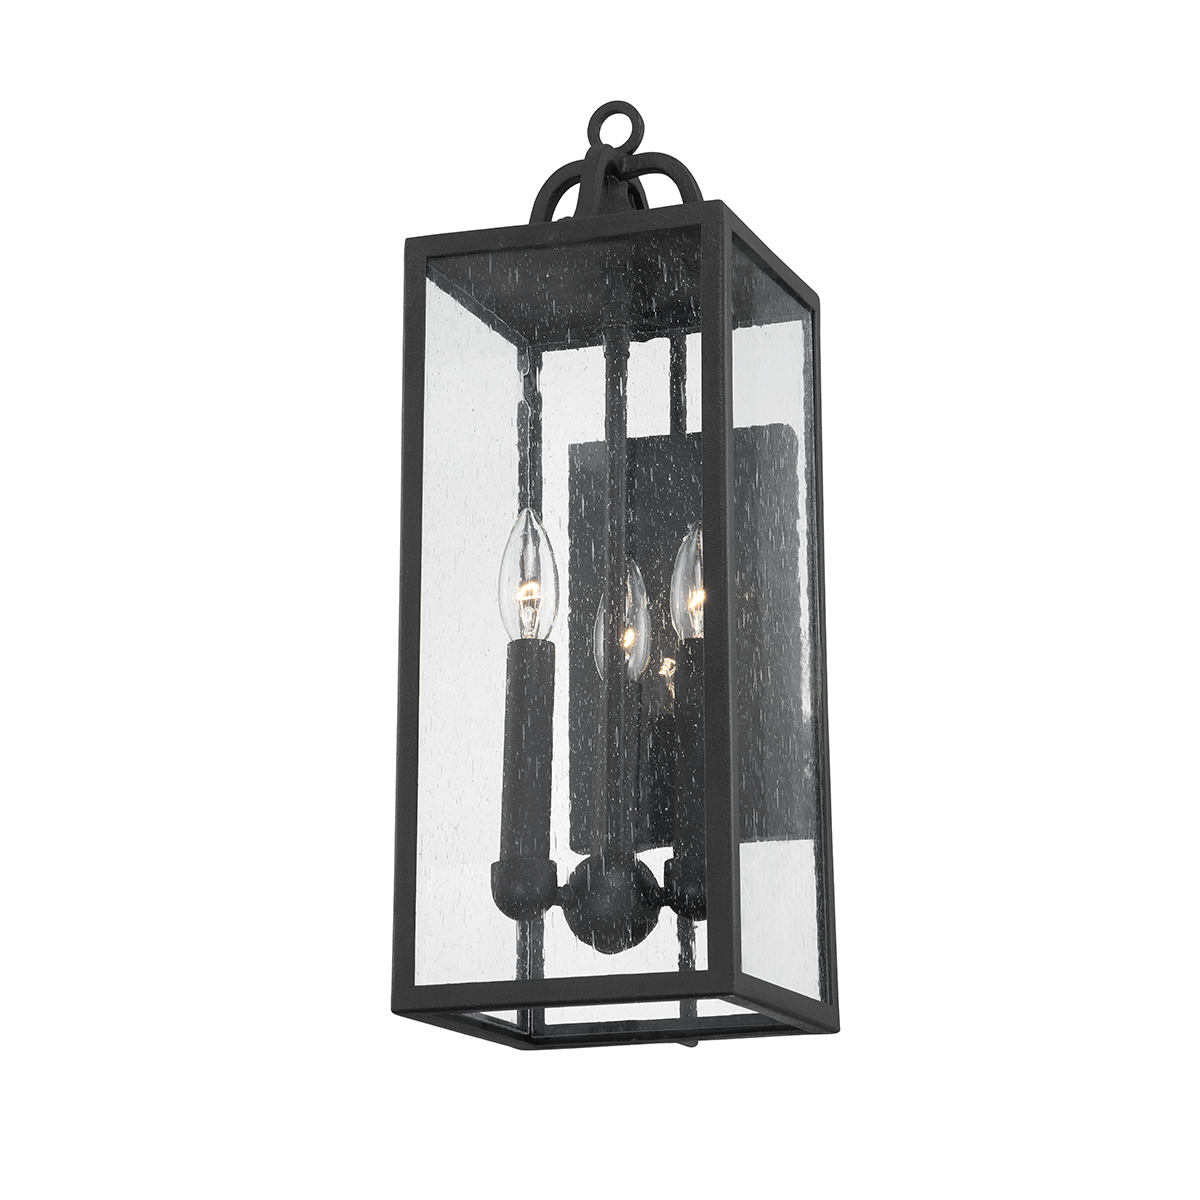 Troy CAIDEN 3 LIGHT EXTERIOR WALL SCONCE B2062 Outdoor l Wall Troy Lighting FORGED IRON  